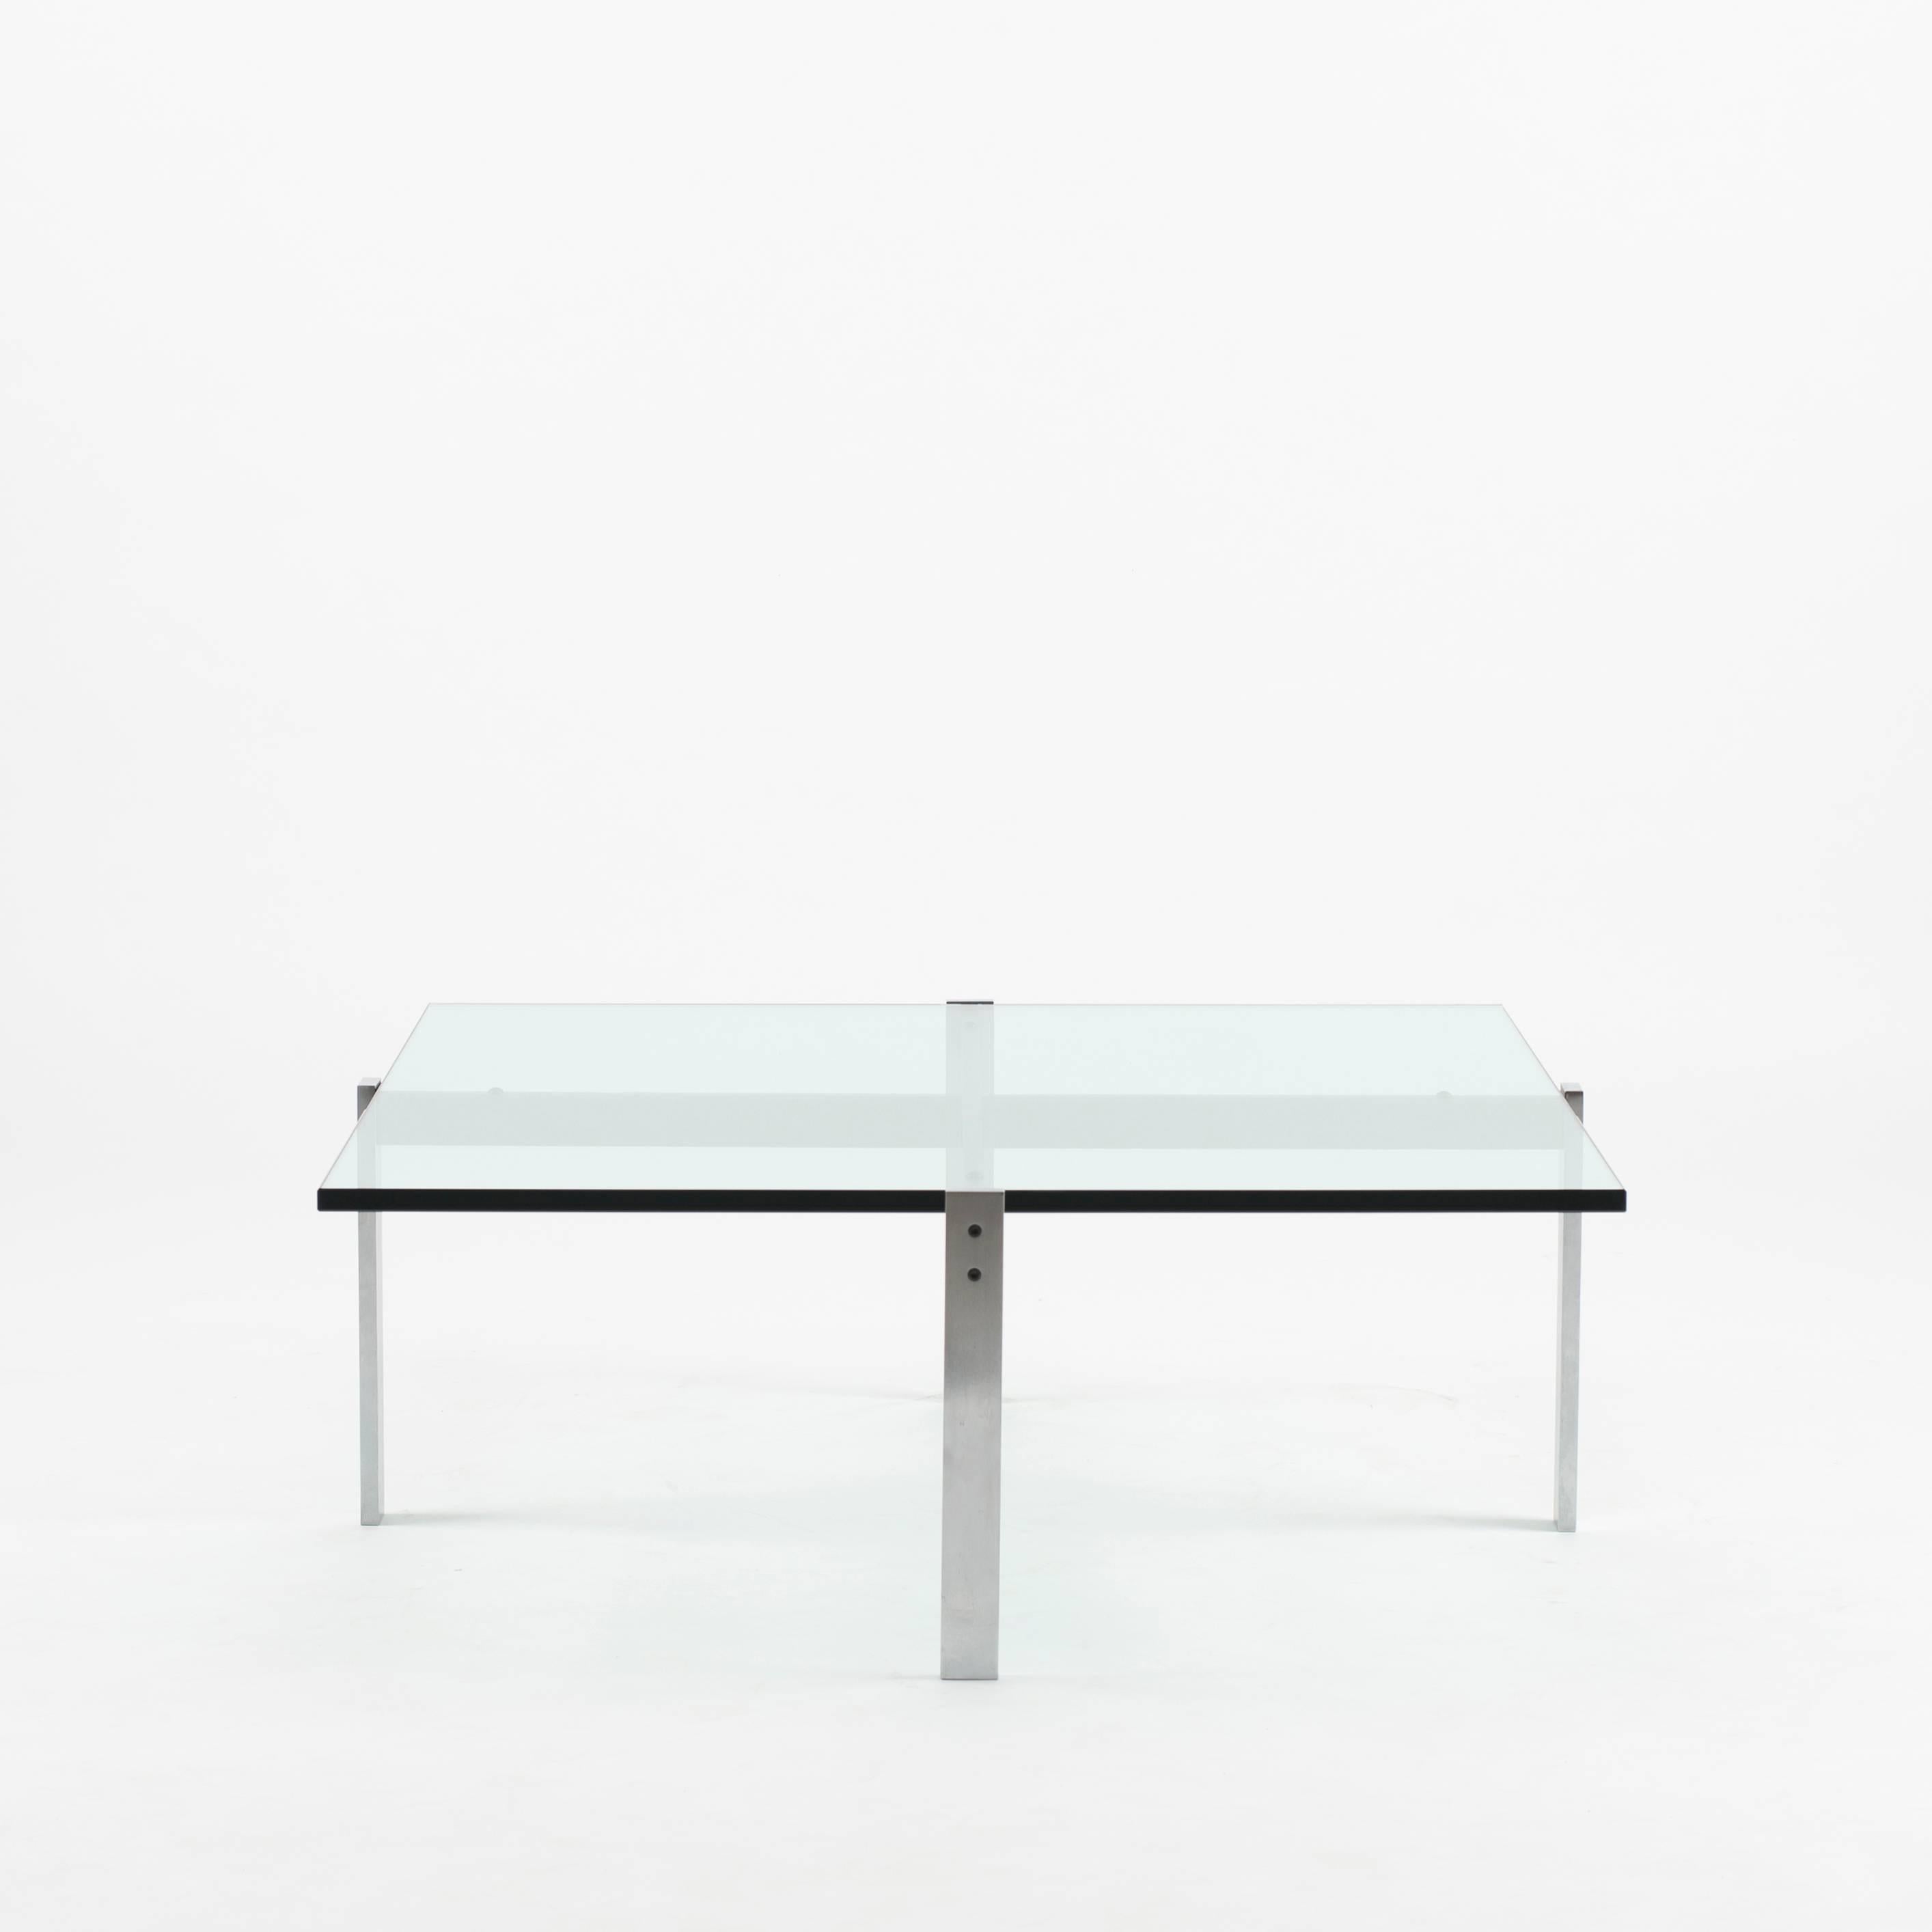 Poul Kjaerholm PK65 coffee table, 1979. Executed by E. Kold Christensen.

Dull chromium-plated steel and glass top. 

Literature: Michael Sheridan, The Funiture of Poul Kjærholm: Catalogue Raisonné, 2007. p. 202 - 204.